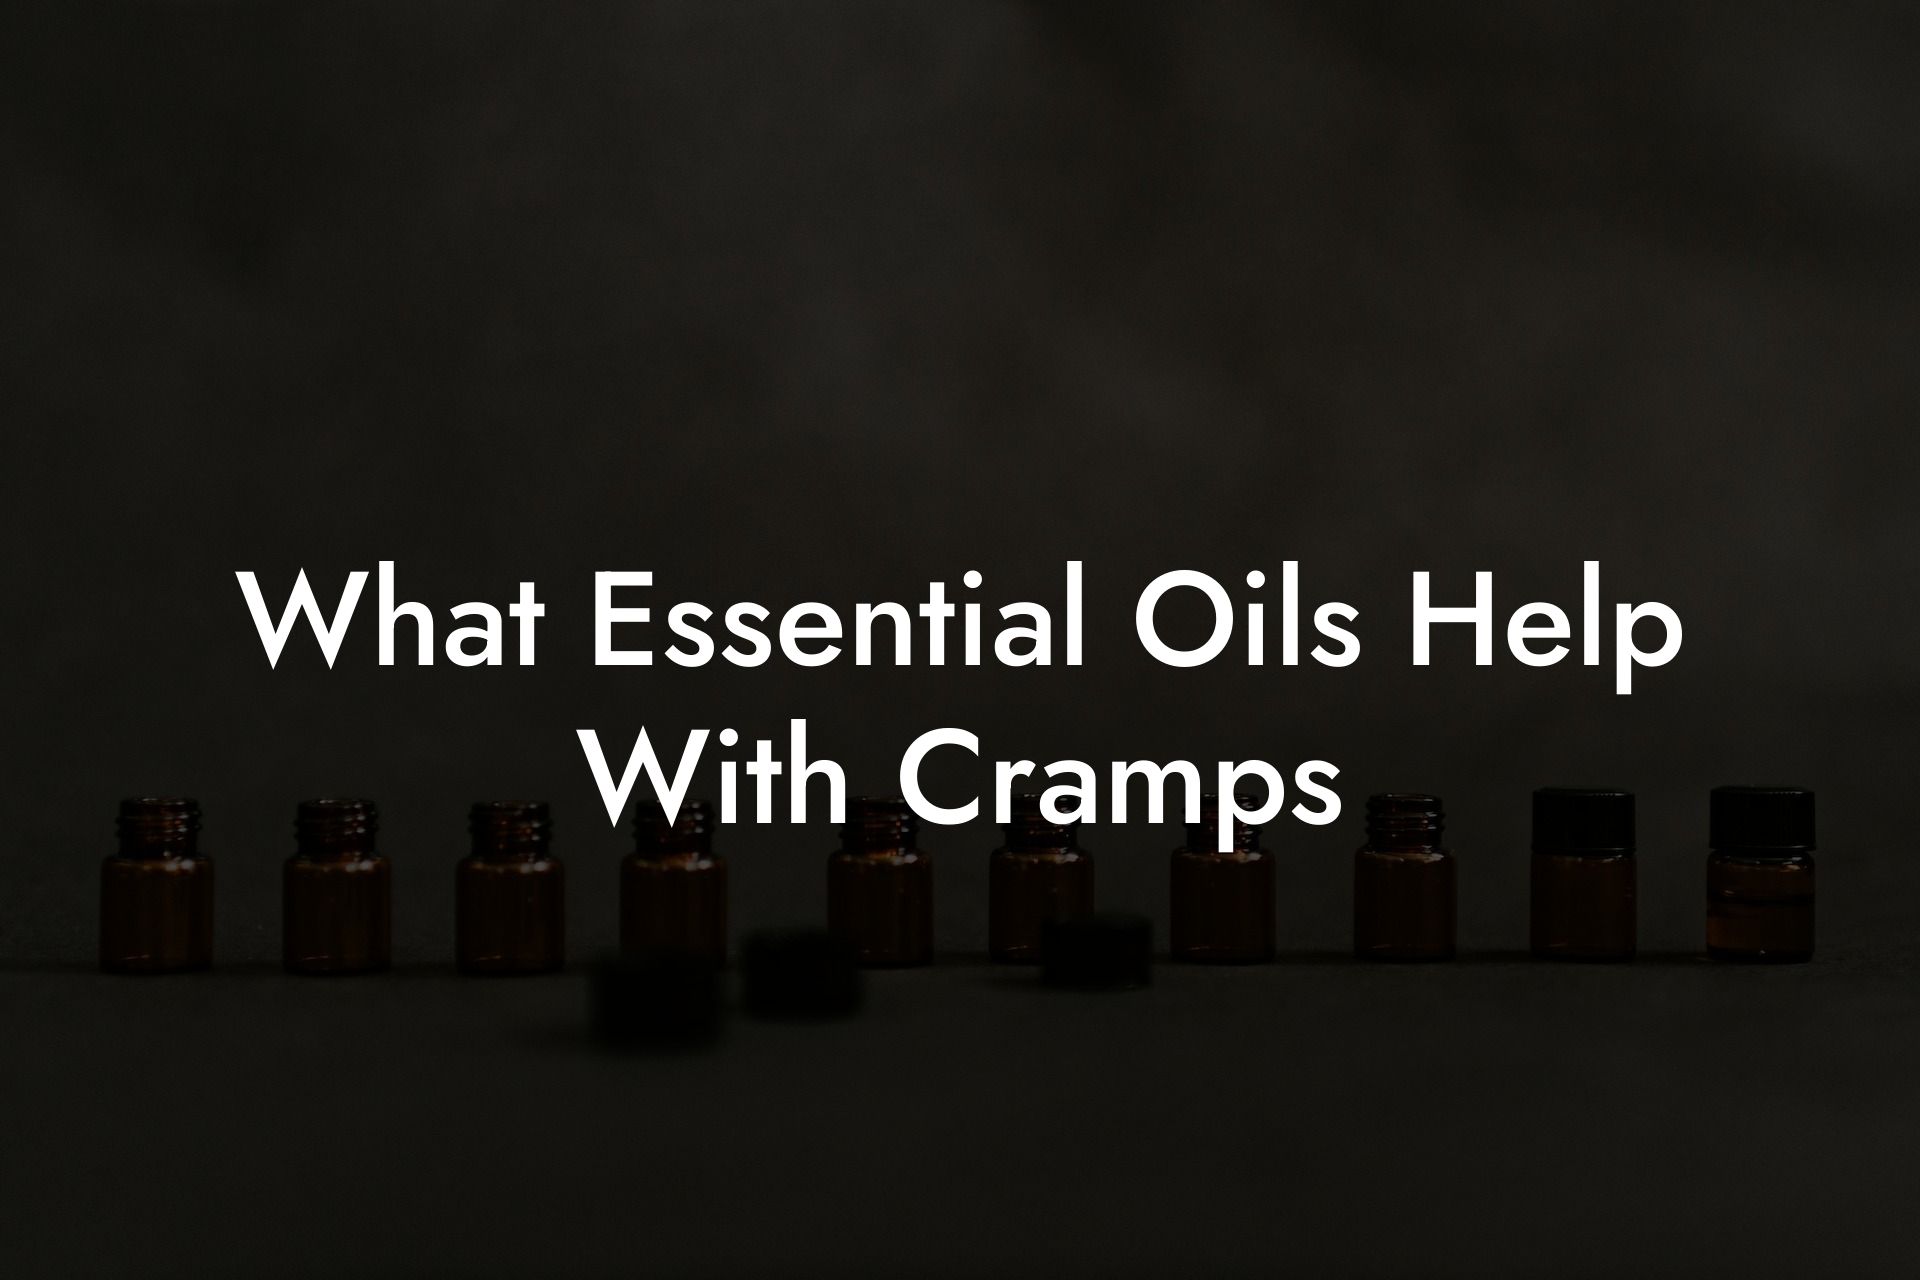 What Essential Oils Help With Cramps